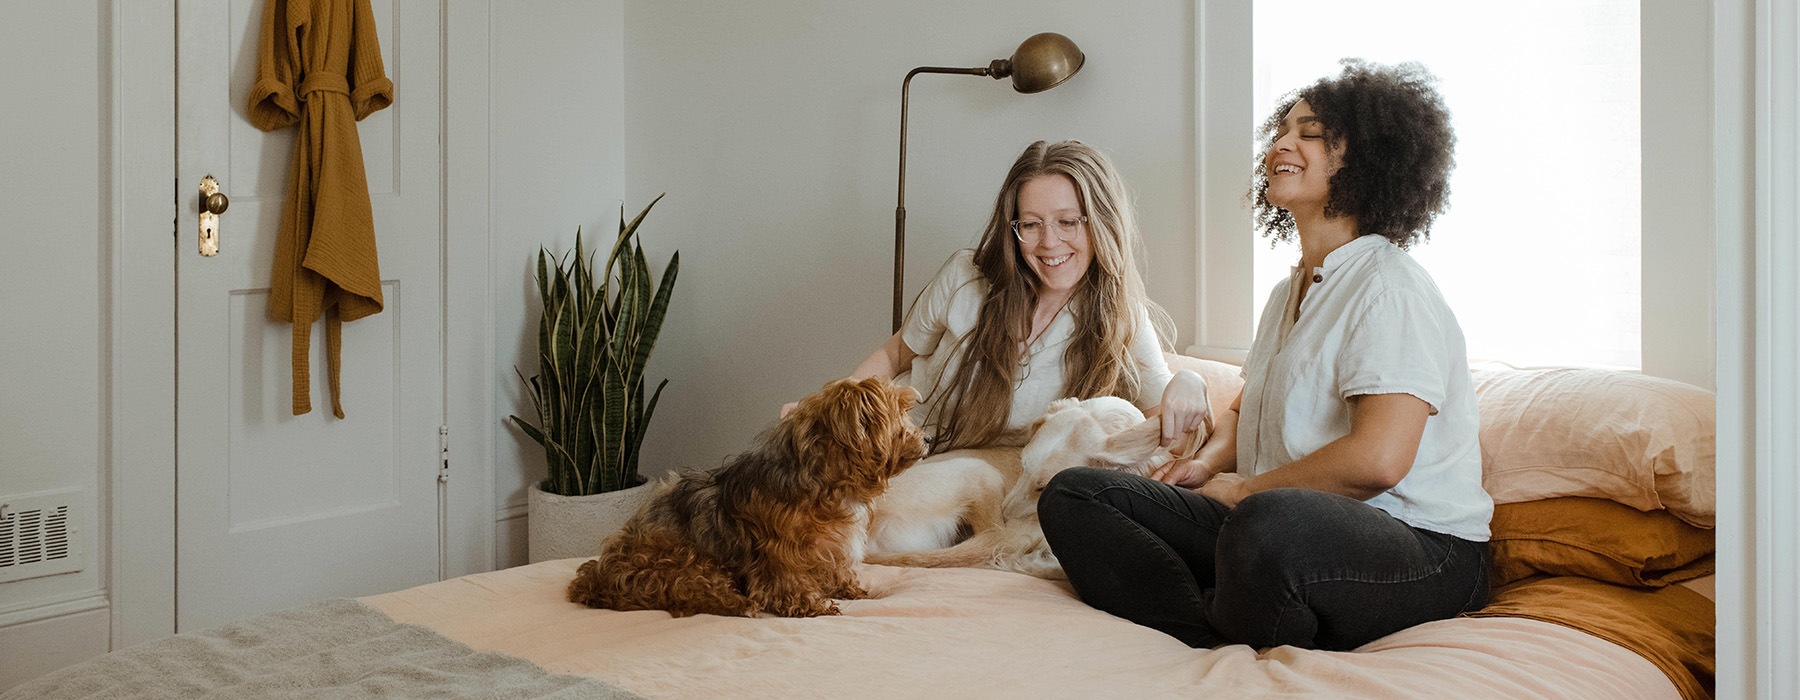 2 people smiling on a bed with a dog